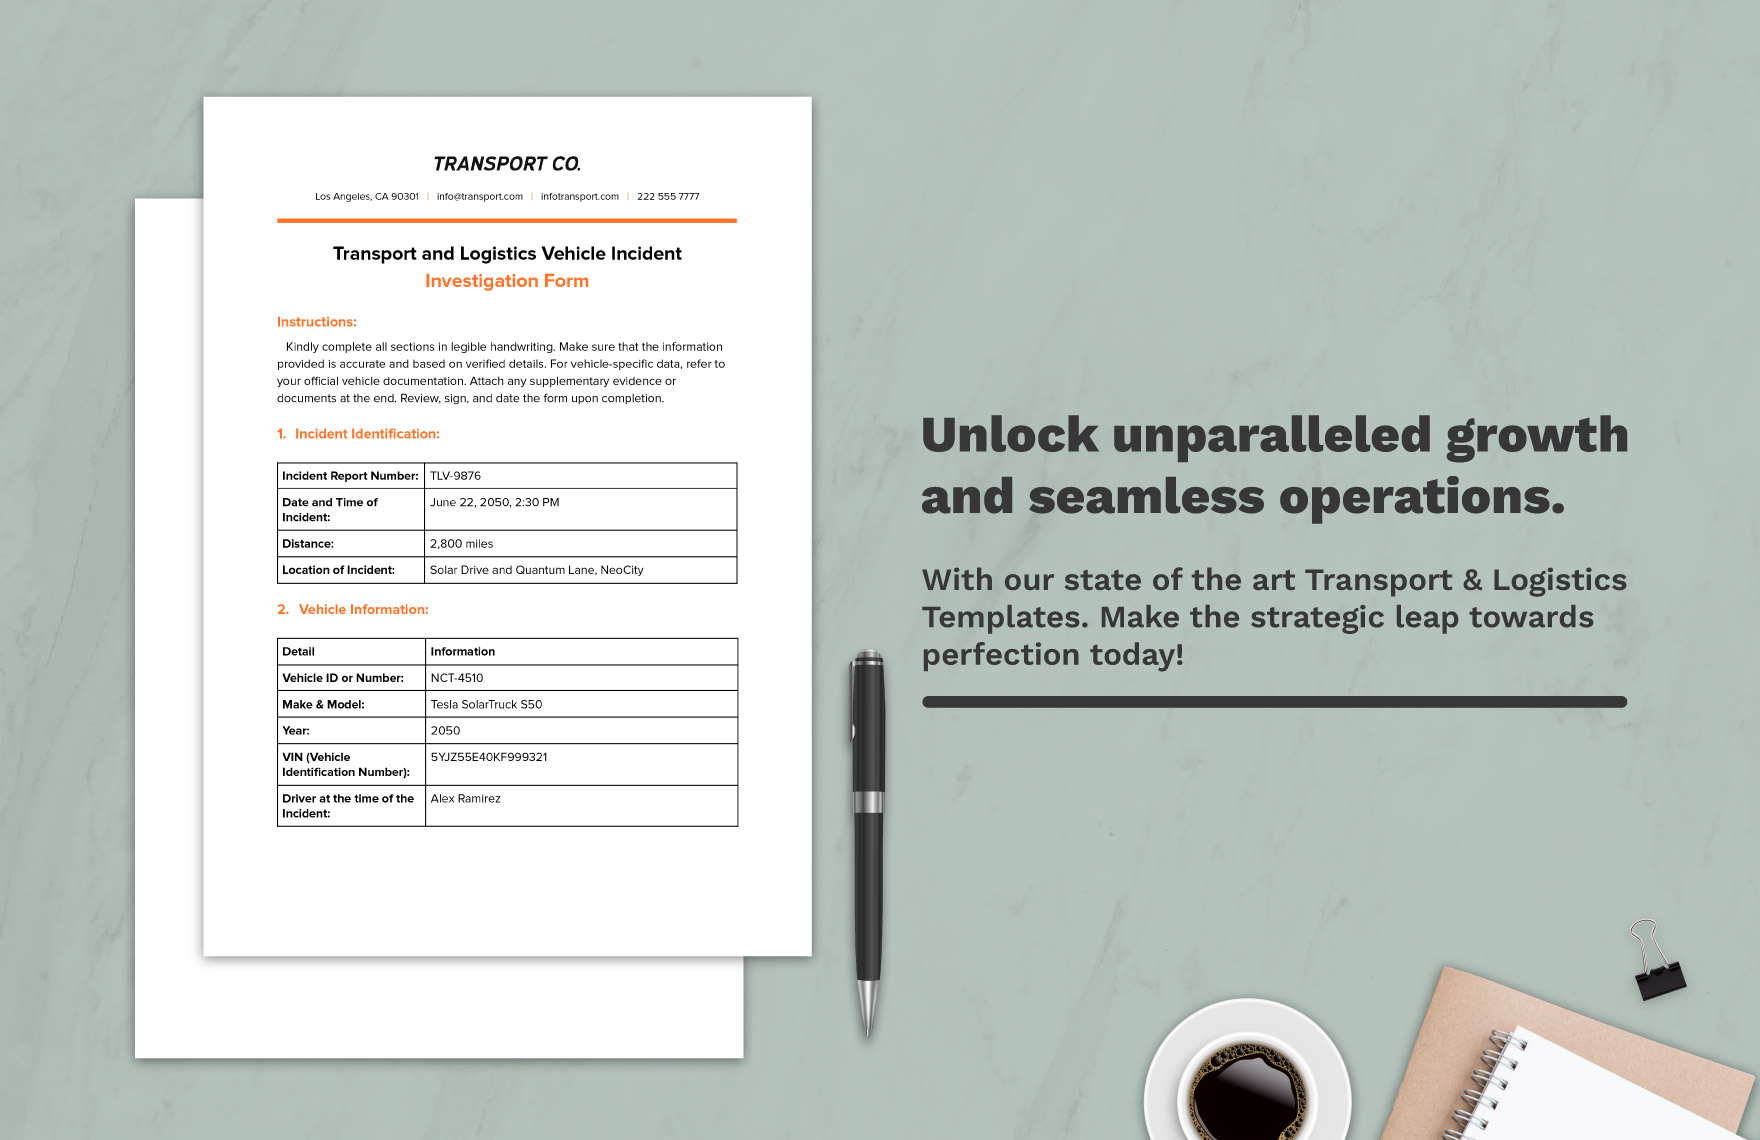 Transport and Logistics Vehicle Incident Investigation Form Template